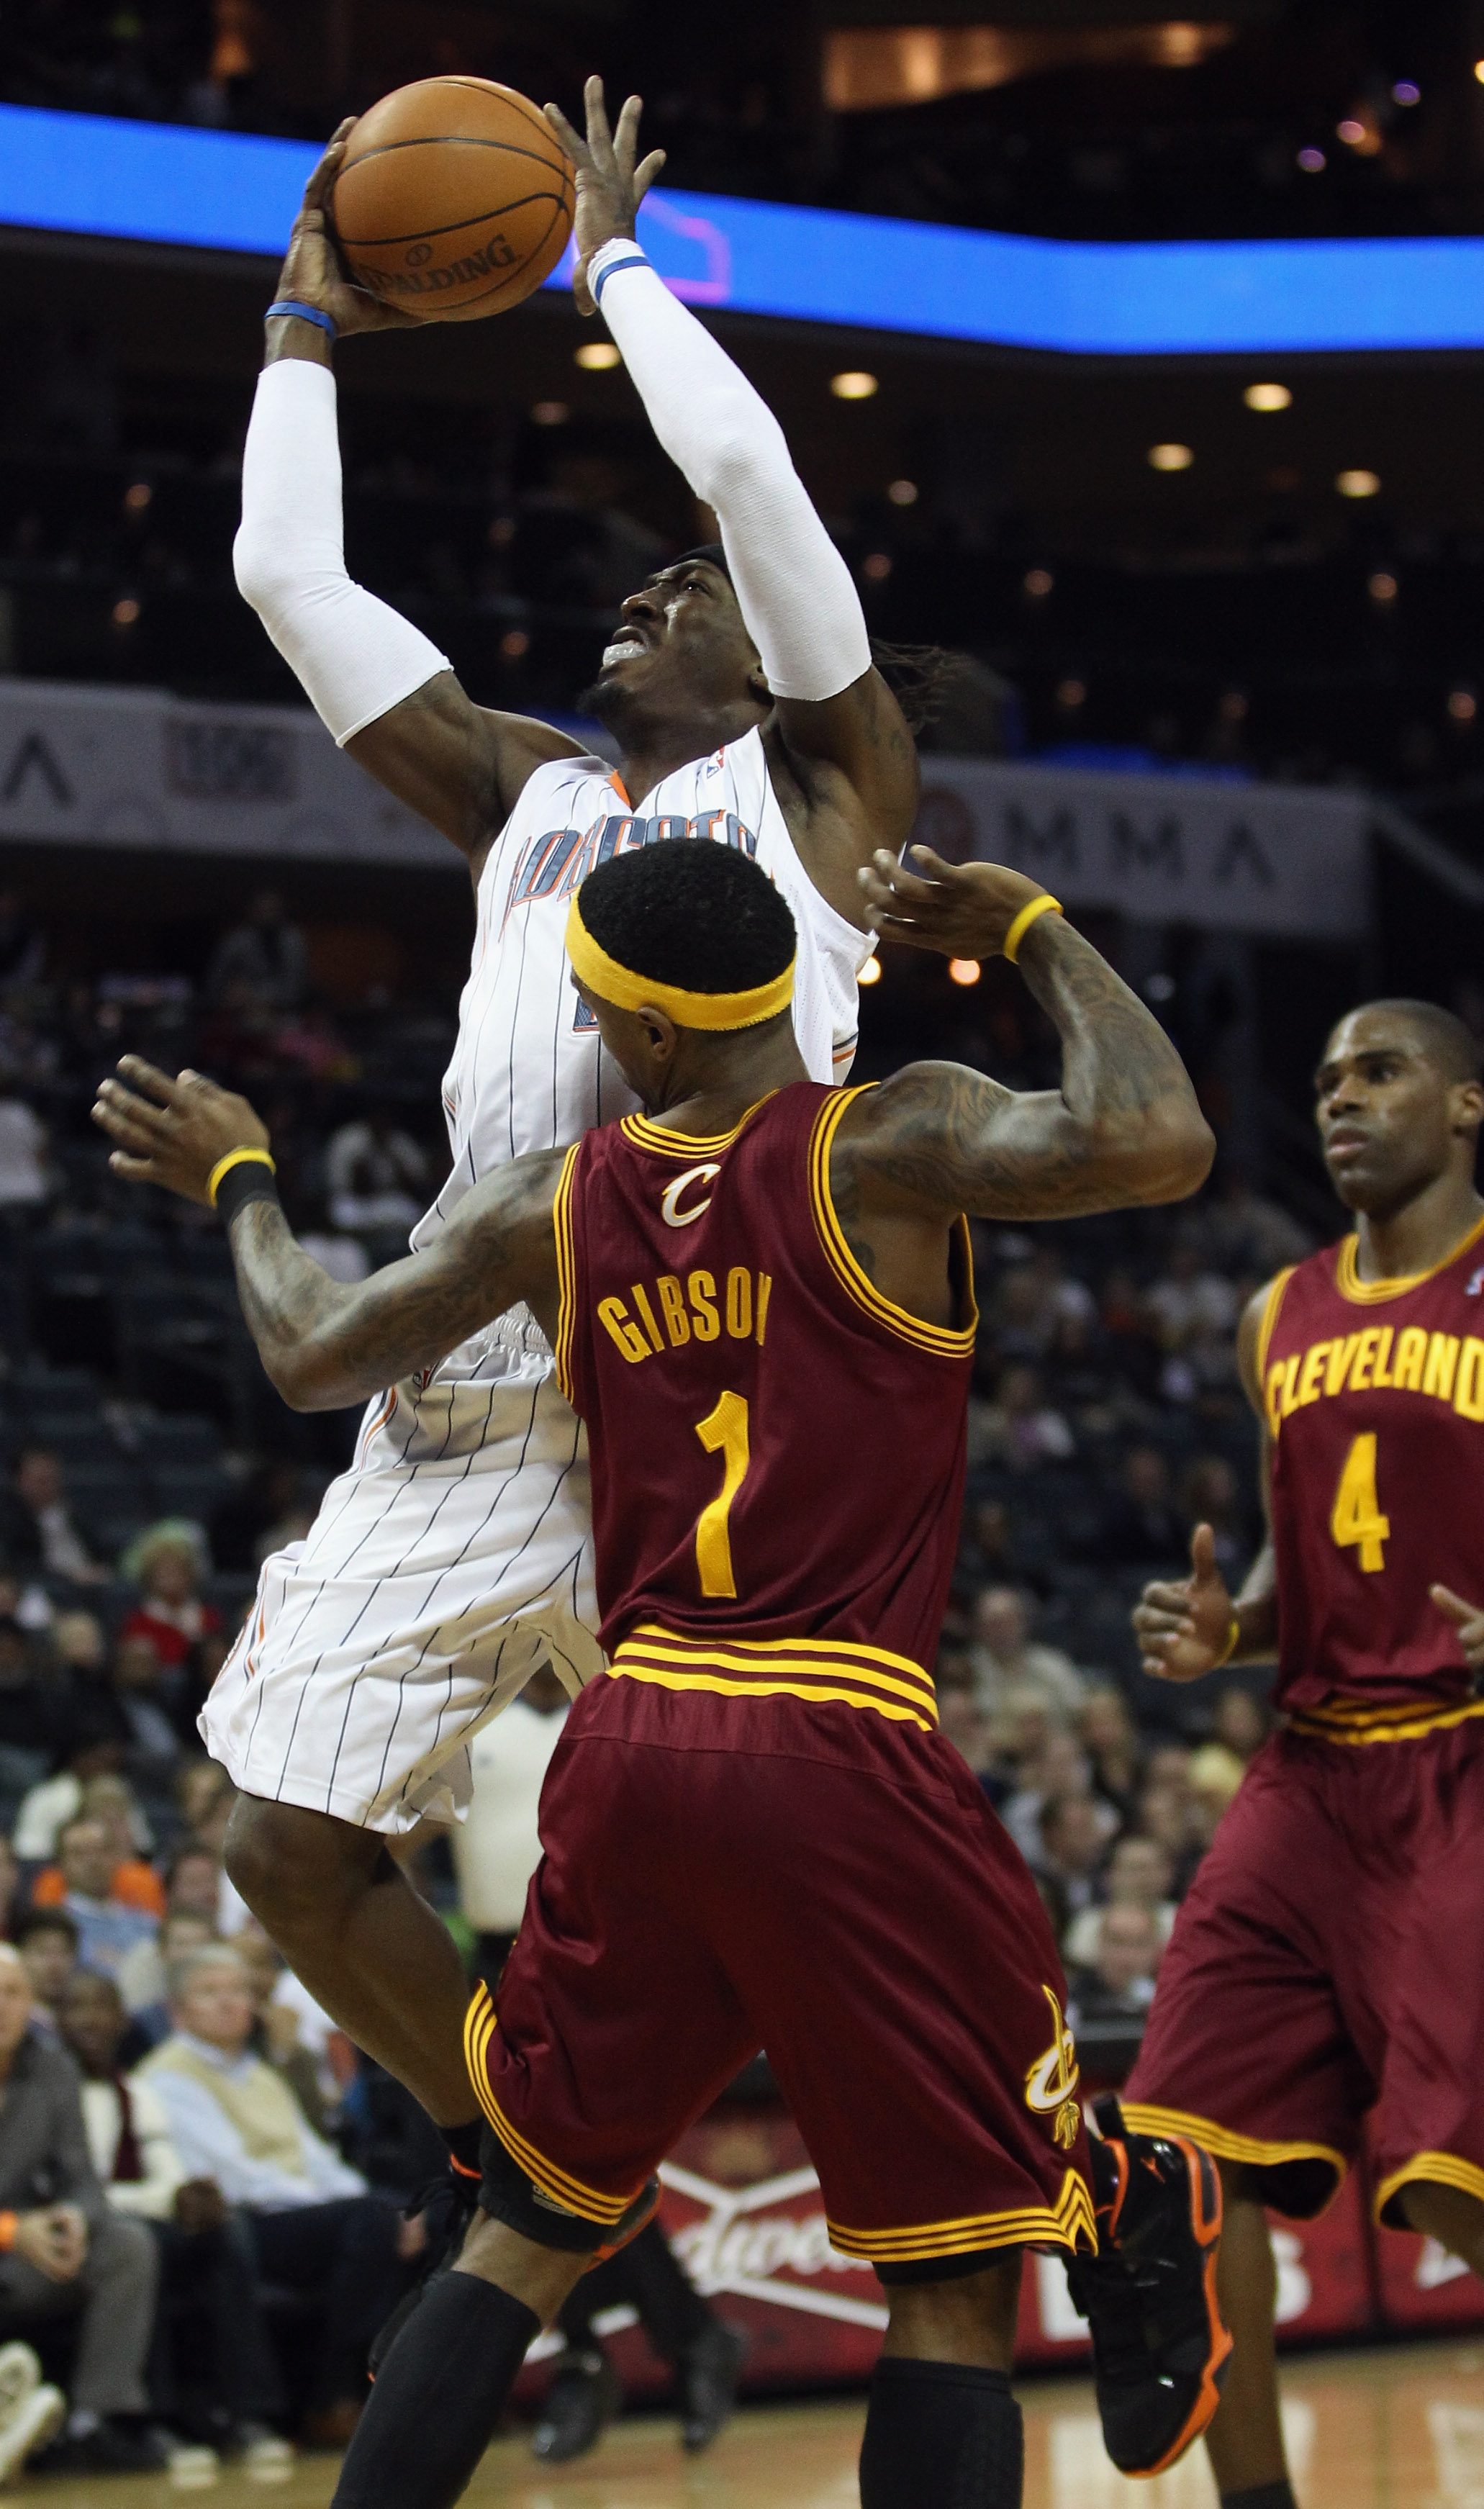 CHARLOTTE, NC - DECEMBER 29:  Daniel Gibson #1 of the Cleveland Cavaliers backs away from Gerald Wallace #3 of the Charlotte Bobcats during their game at Time Warner Cable Arena on December 29, 2010 in Charlotte, North Carolina. NOTE TO USER: User express